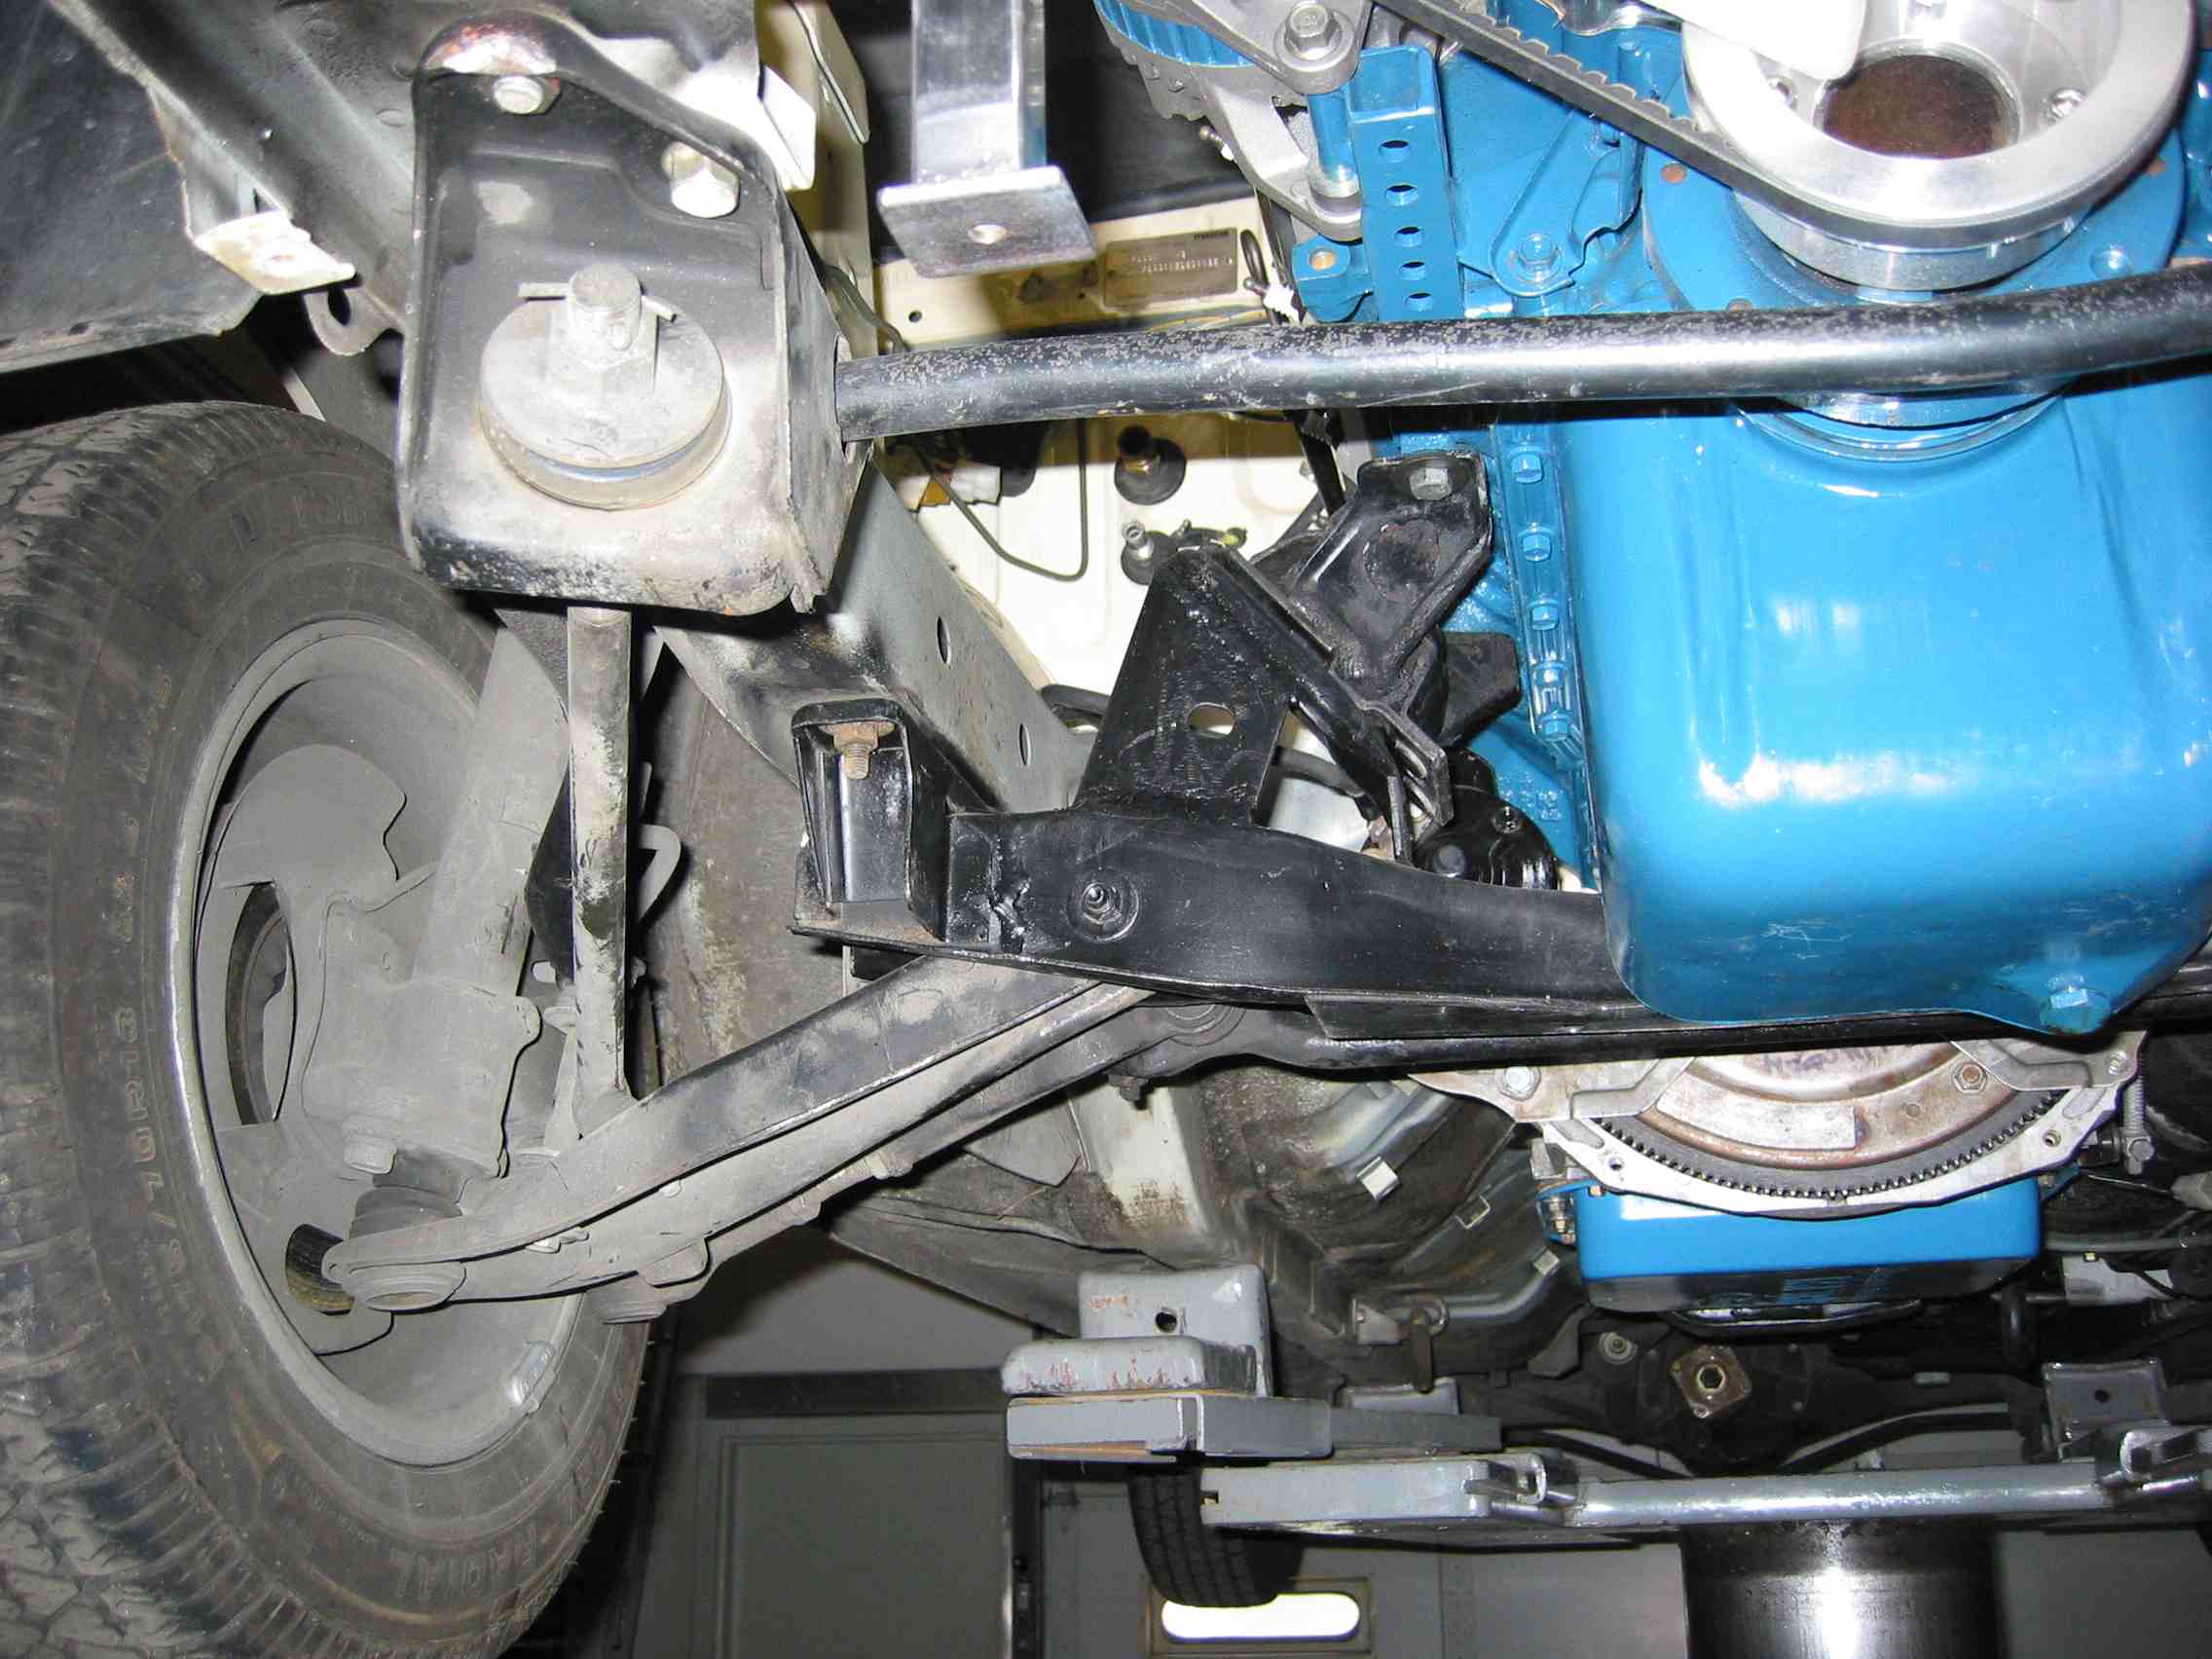 Inquiring About Another 302 Rx 7 Wanting To Know A Bit About Mounts Rx7club Com Mazda Rx7 Forum